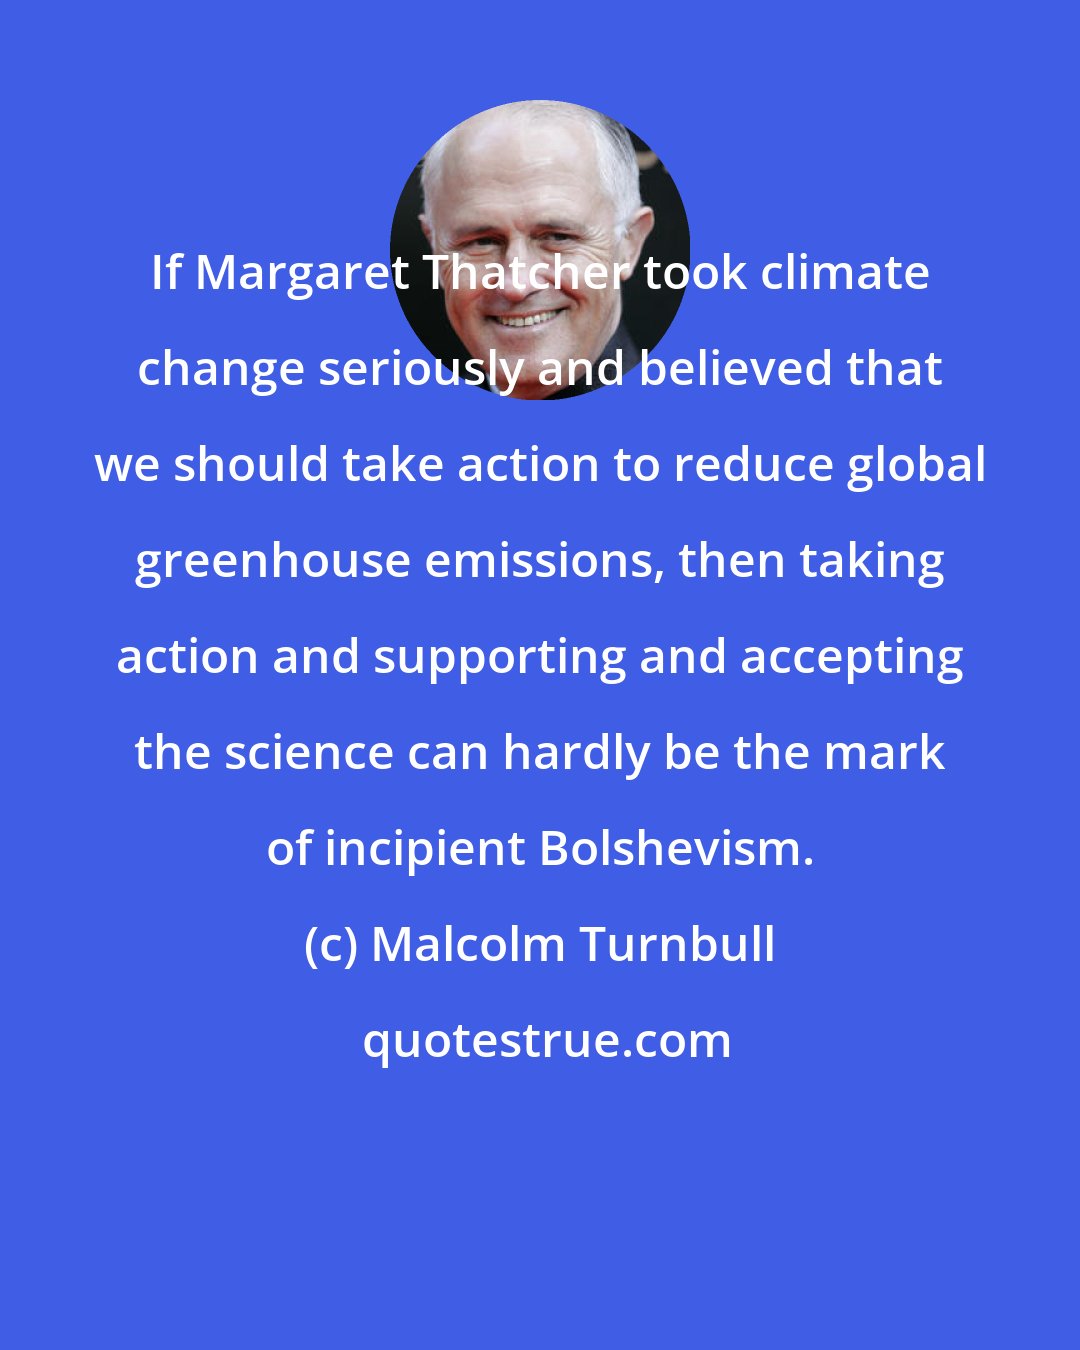 Malcolm Turnbull: If Margaret Thatcher took climate change seriously and believed that we should take action to reduce global greenhouse emissions, then taking action and supporting and accepting the science can hardly be the mark of incipient Bolshevism.